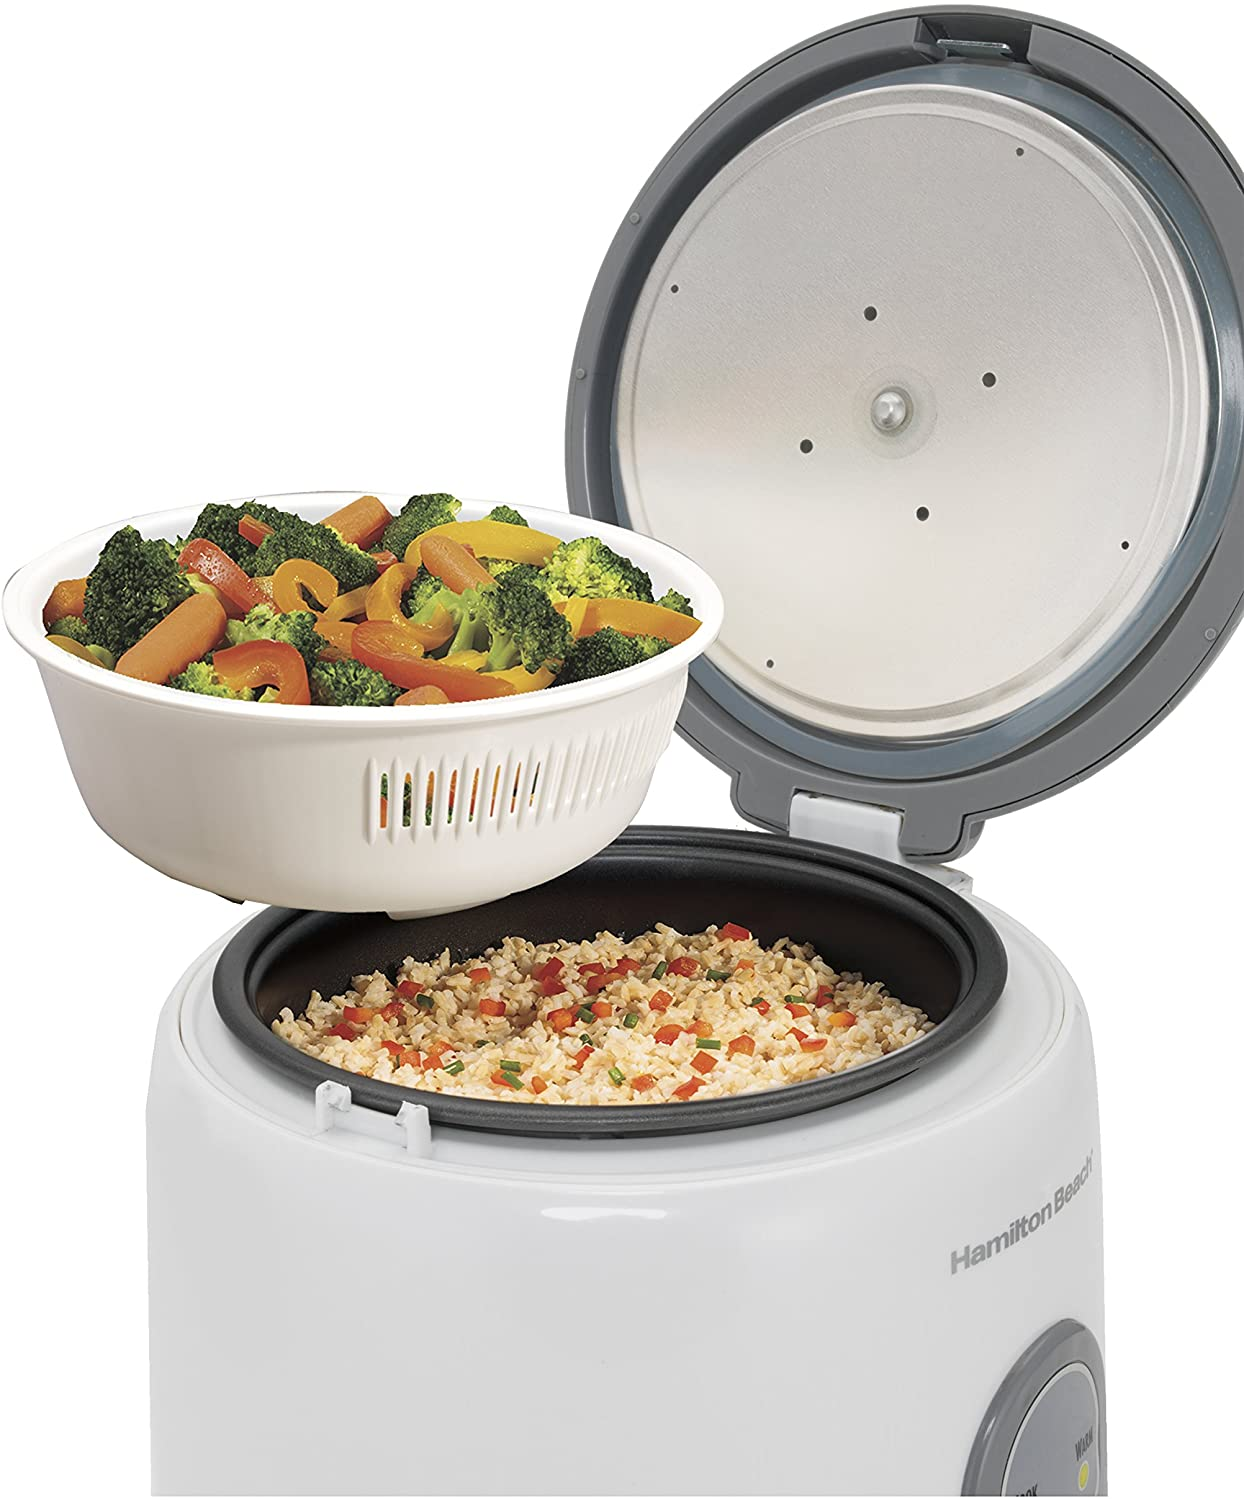 10 Cup Capacity (Cooked) Rice Cooker with Steam Basket - Model 37533NR